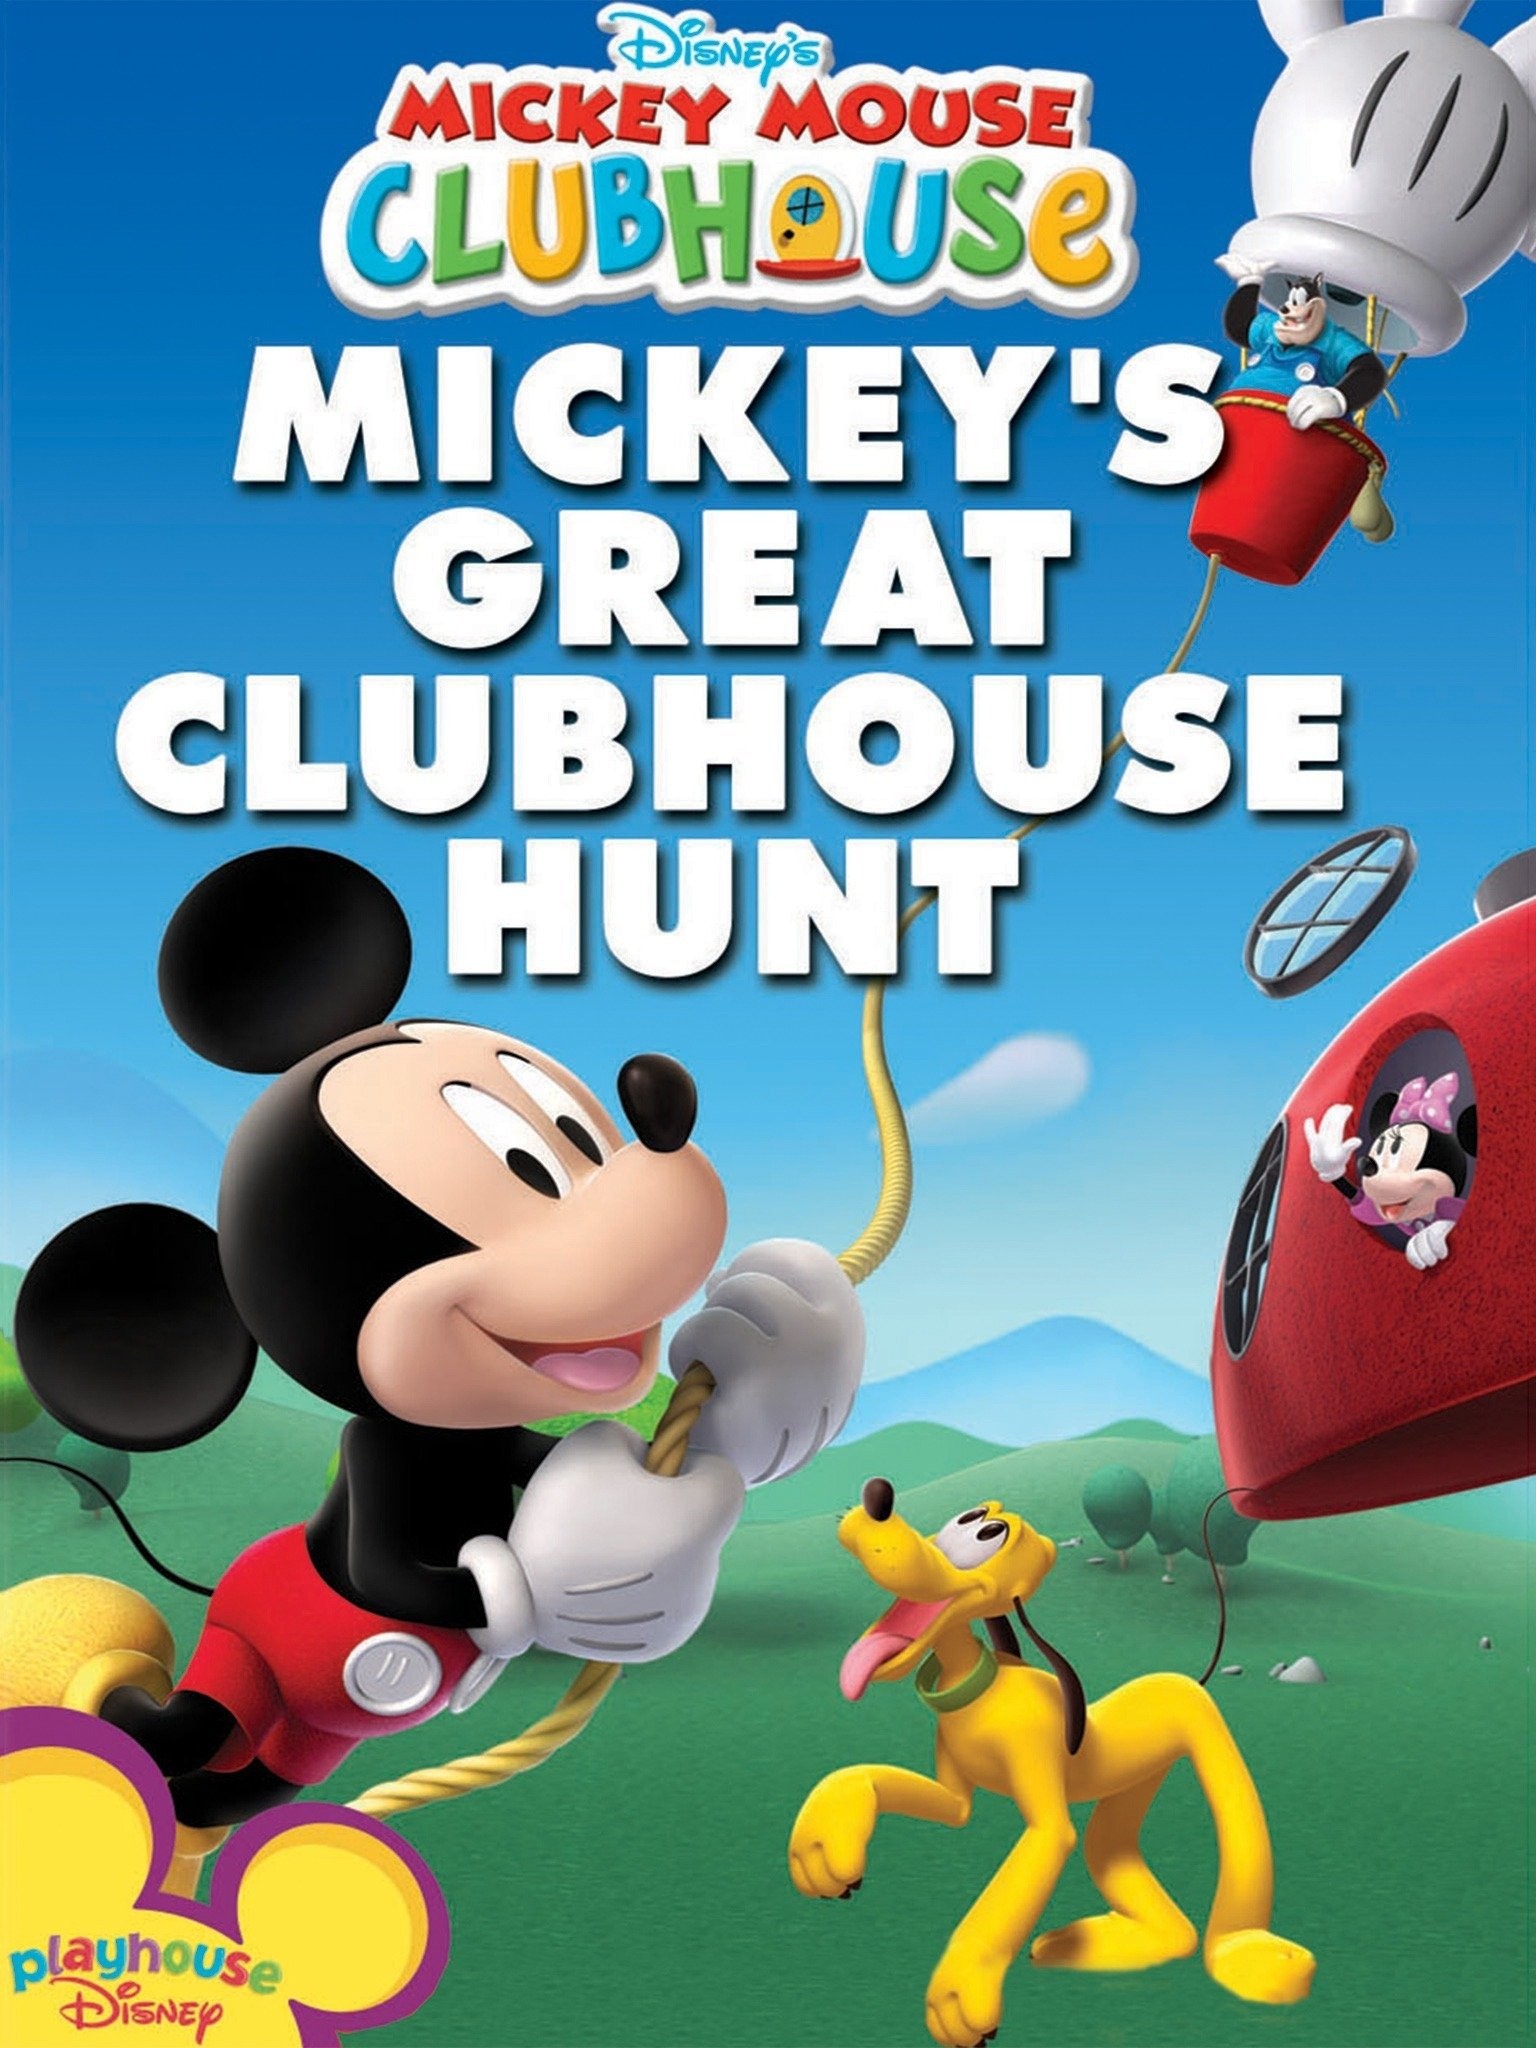 Mickey's Treasure Hunt, Mickey Mouse Clubhouse Episodes Wiki